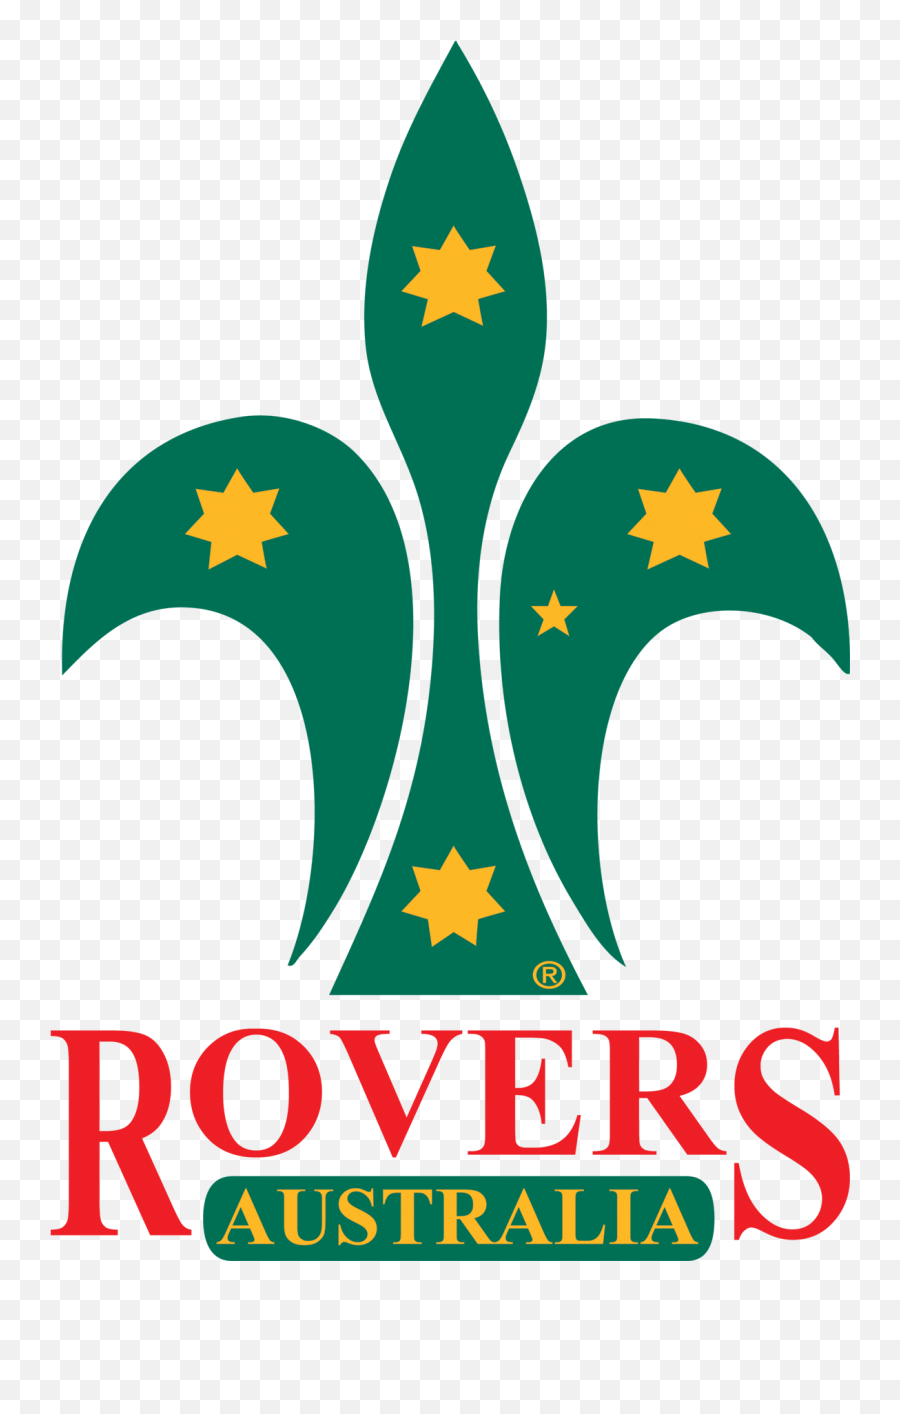 Rovers 18 - 25 Years Scouts Victoria Australia Kaaba Png,Rover Logo